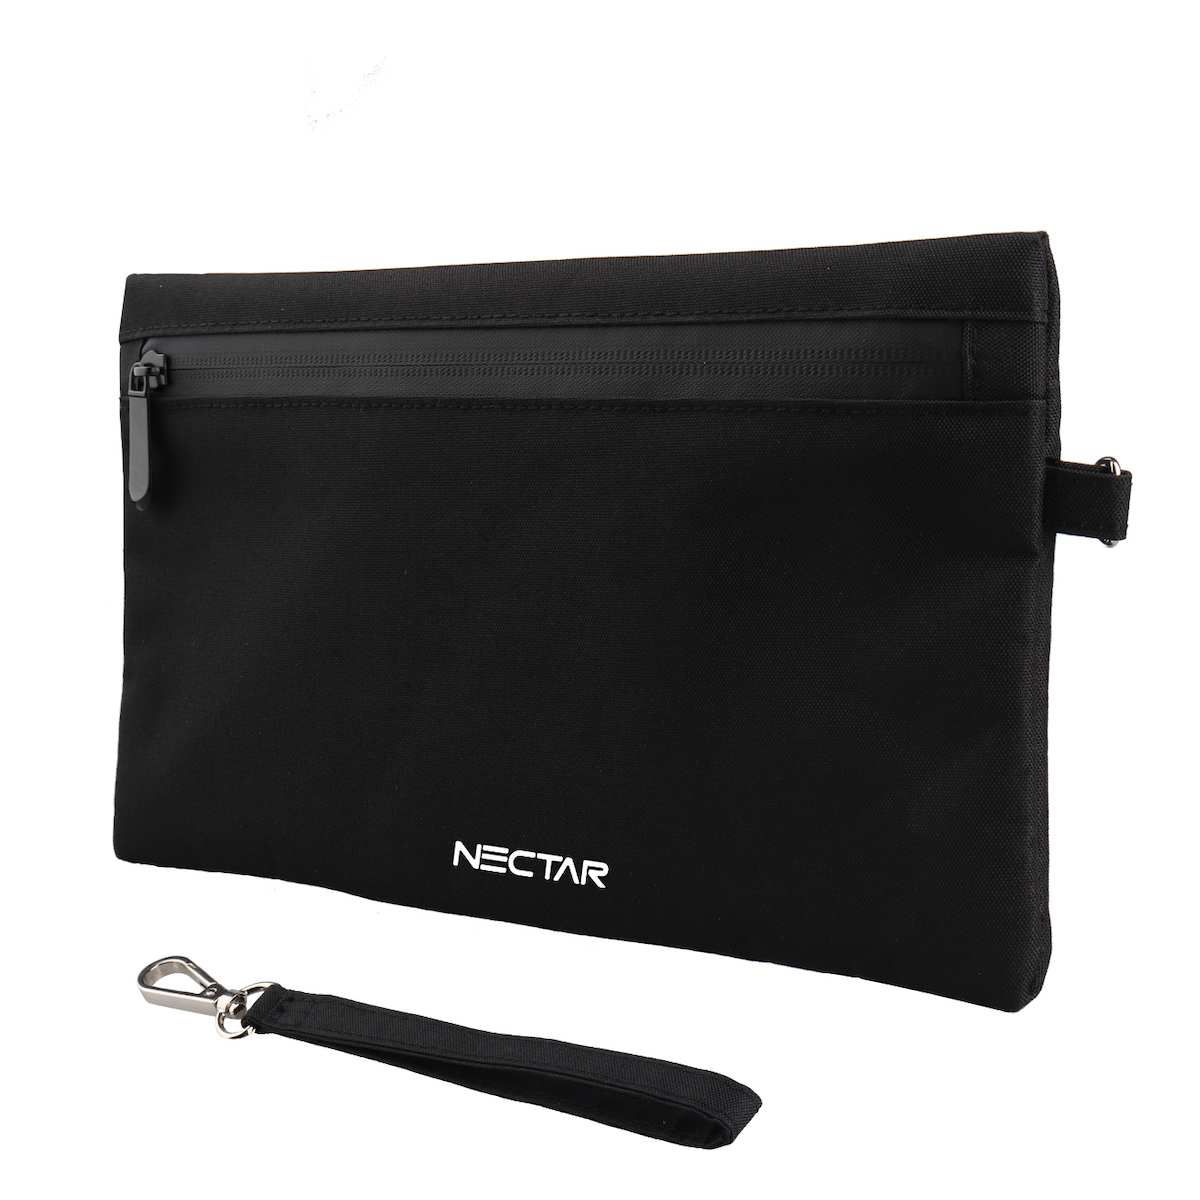 Nectar Smell Proof Bag